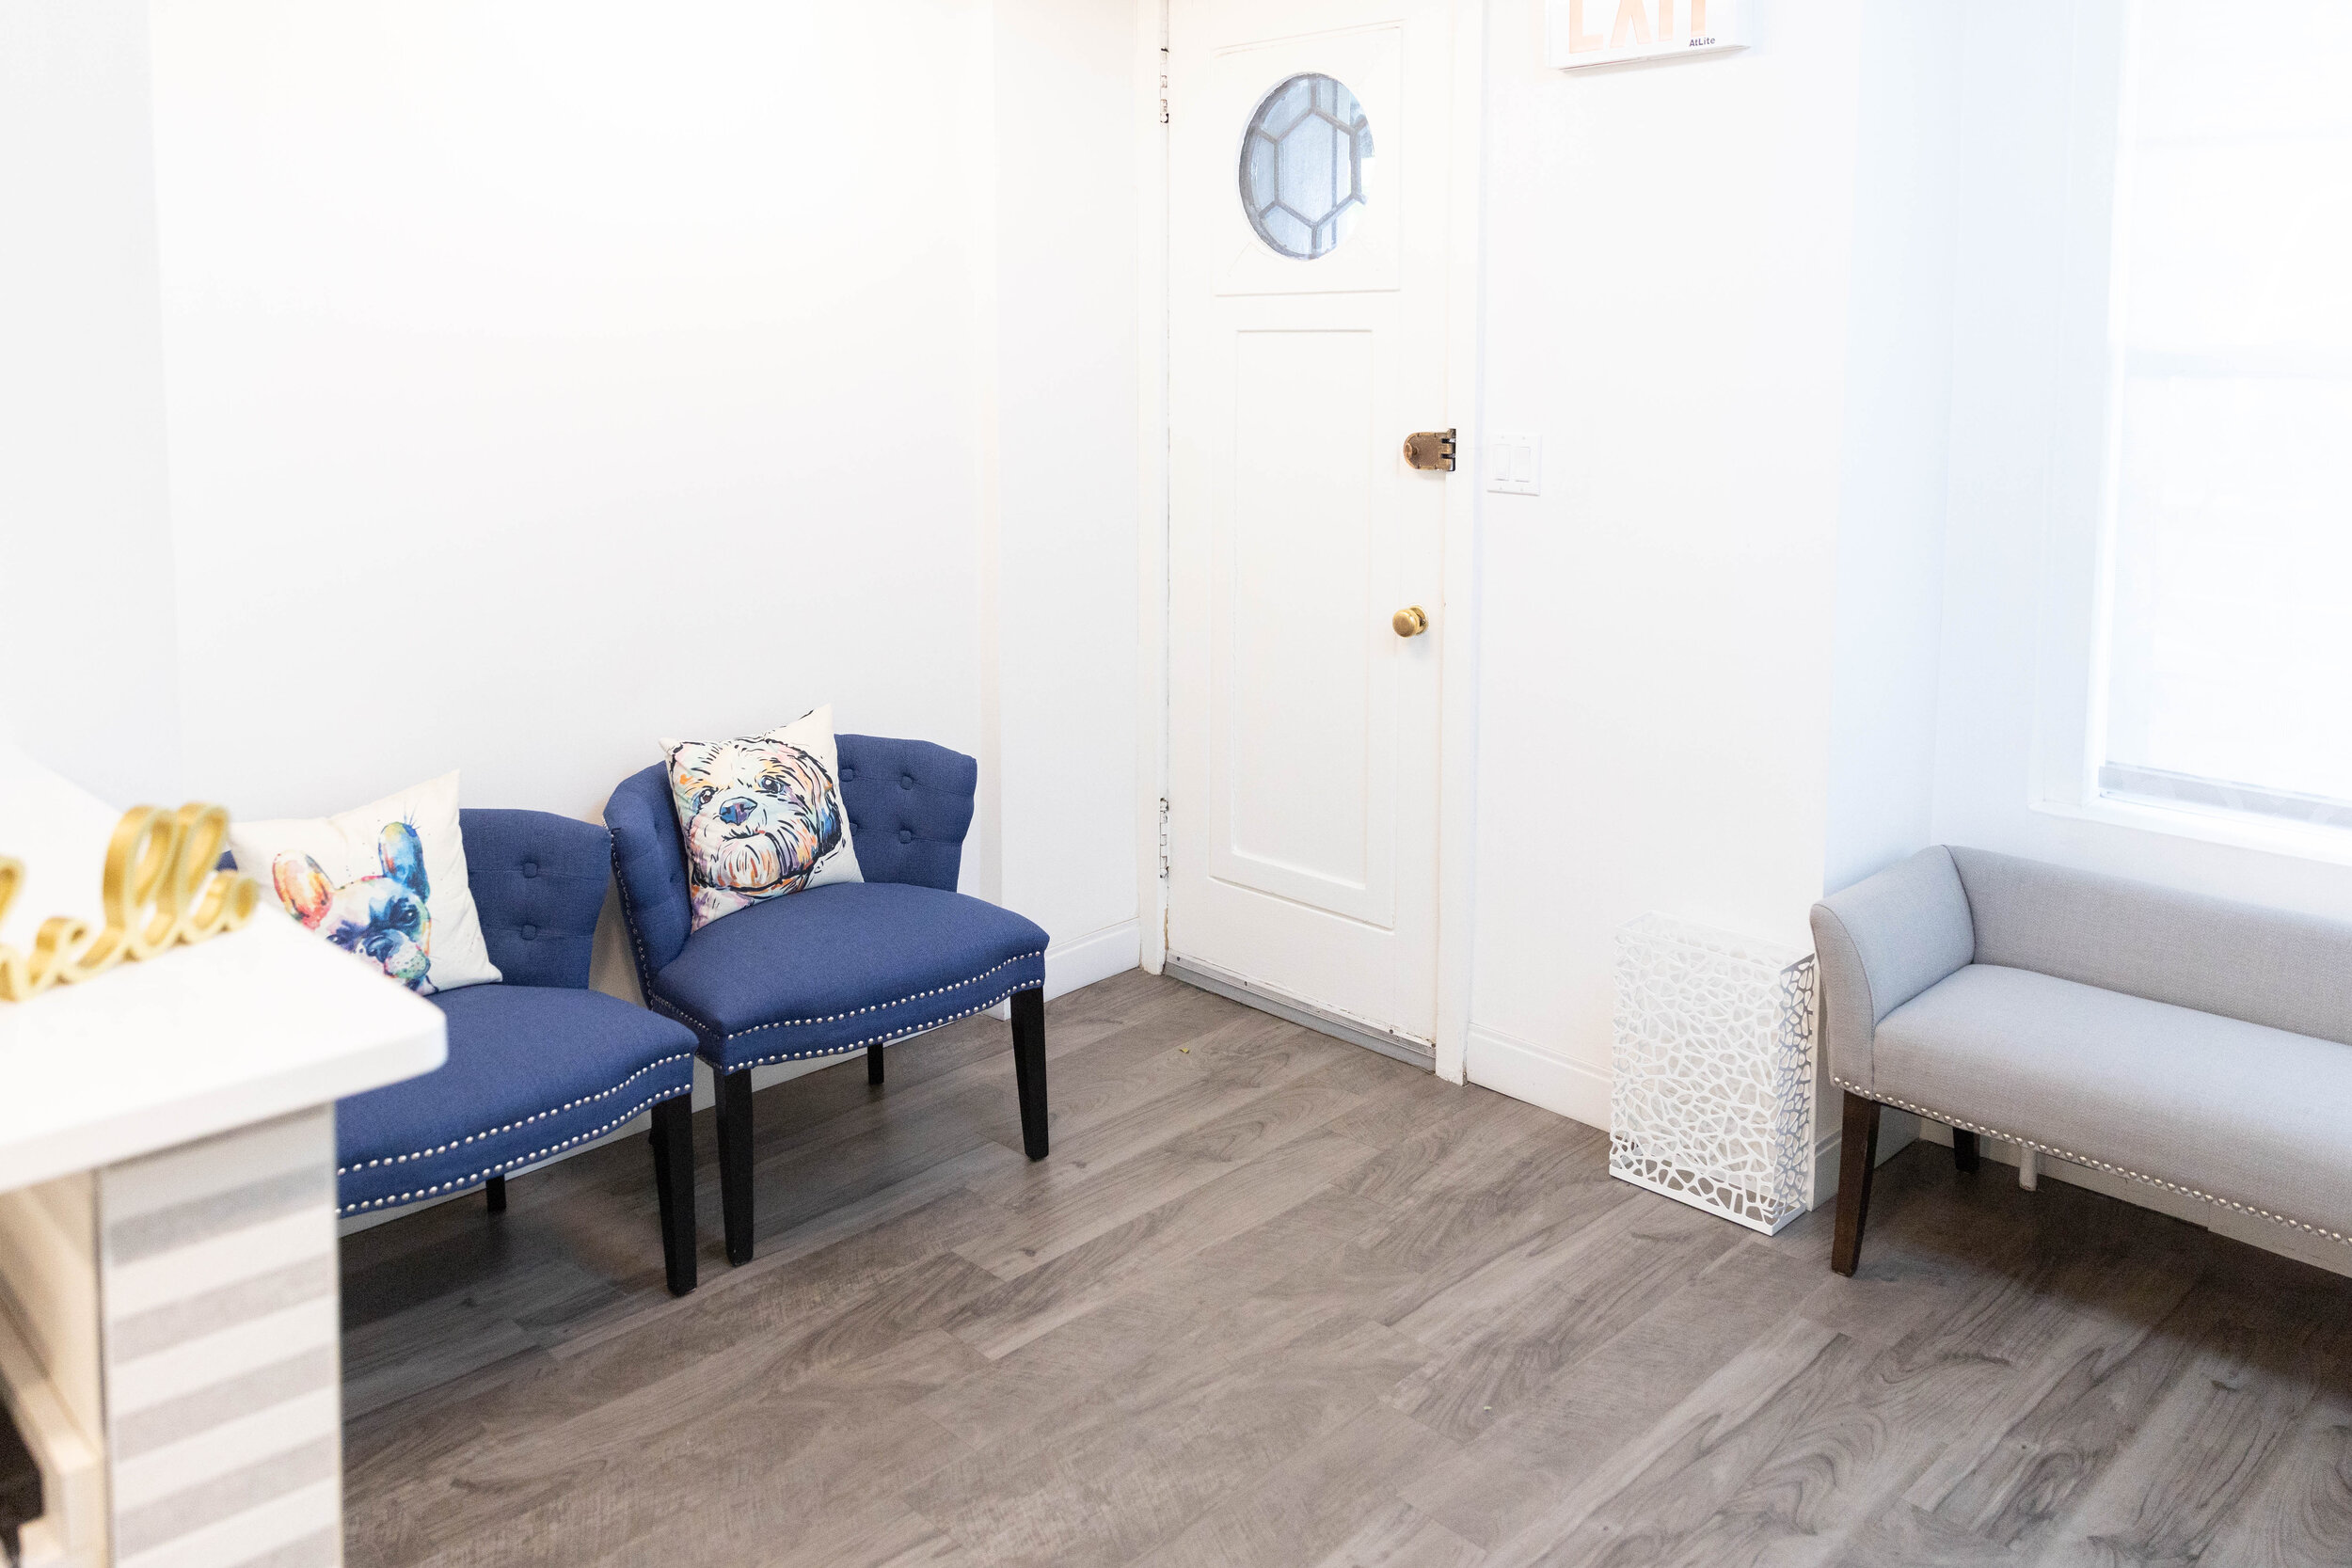 Make yourself comfortable in our patient lounge